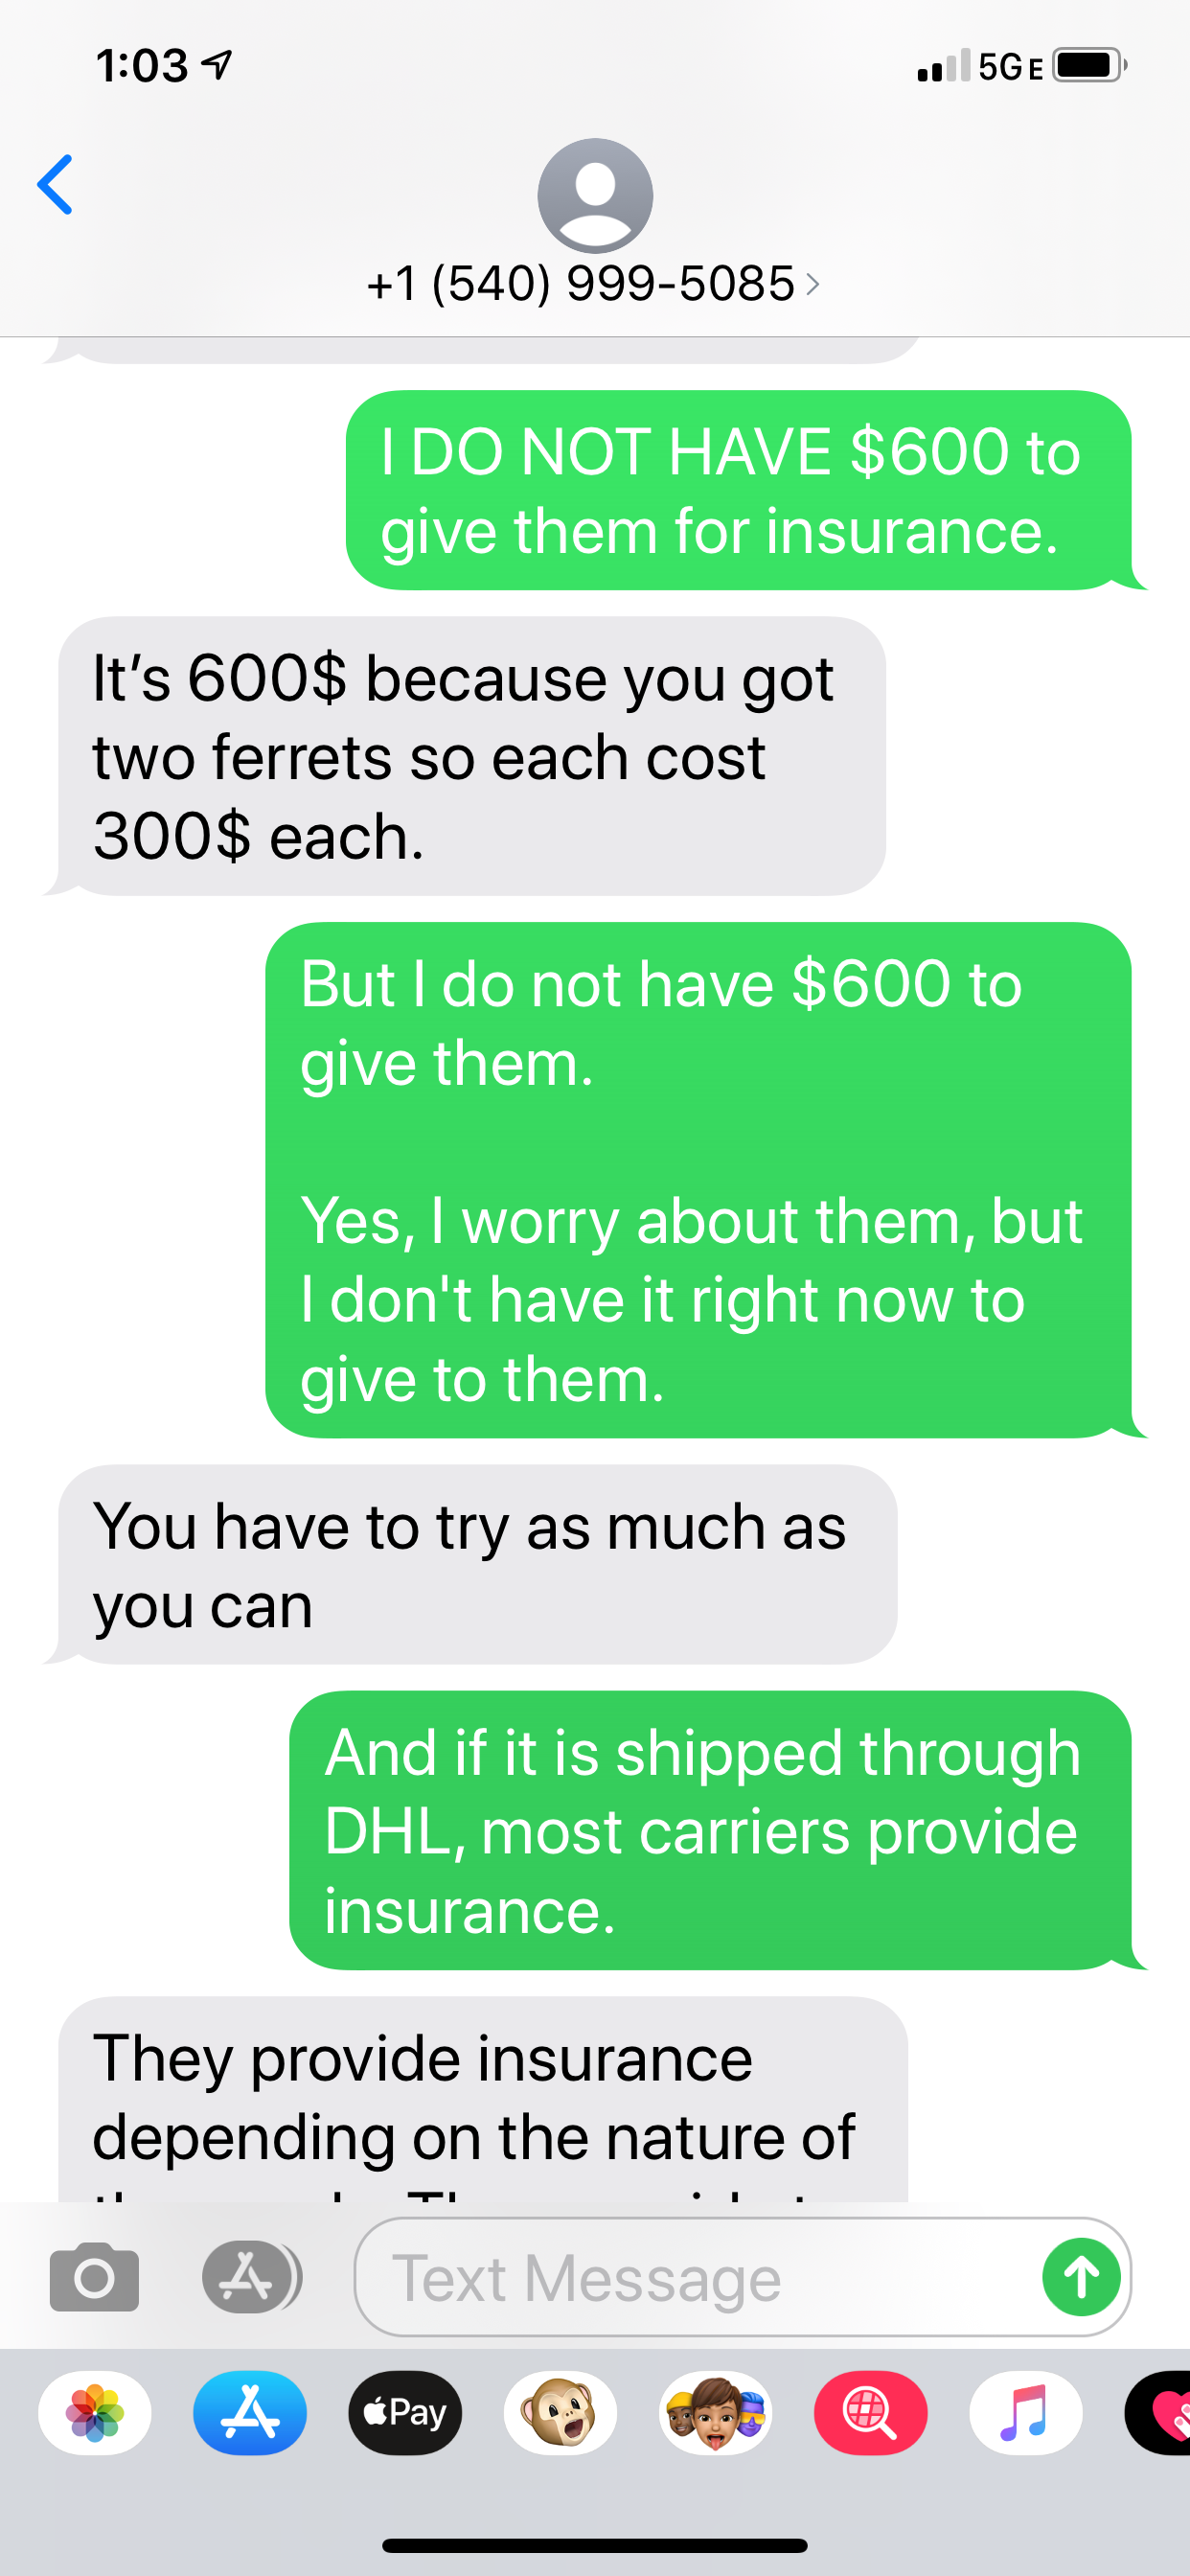 Telling me I have to try to pay the $600.